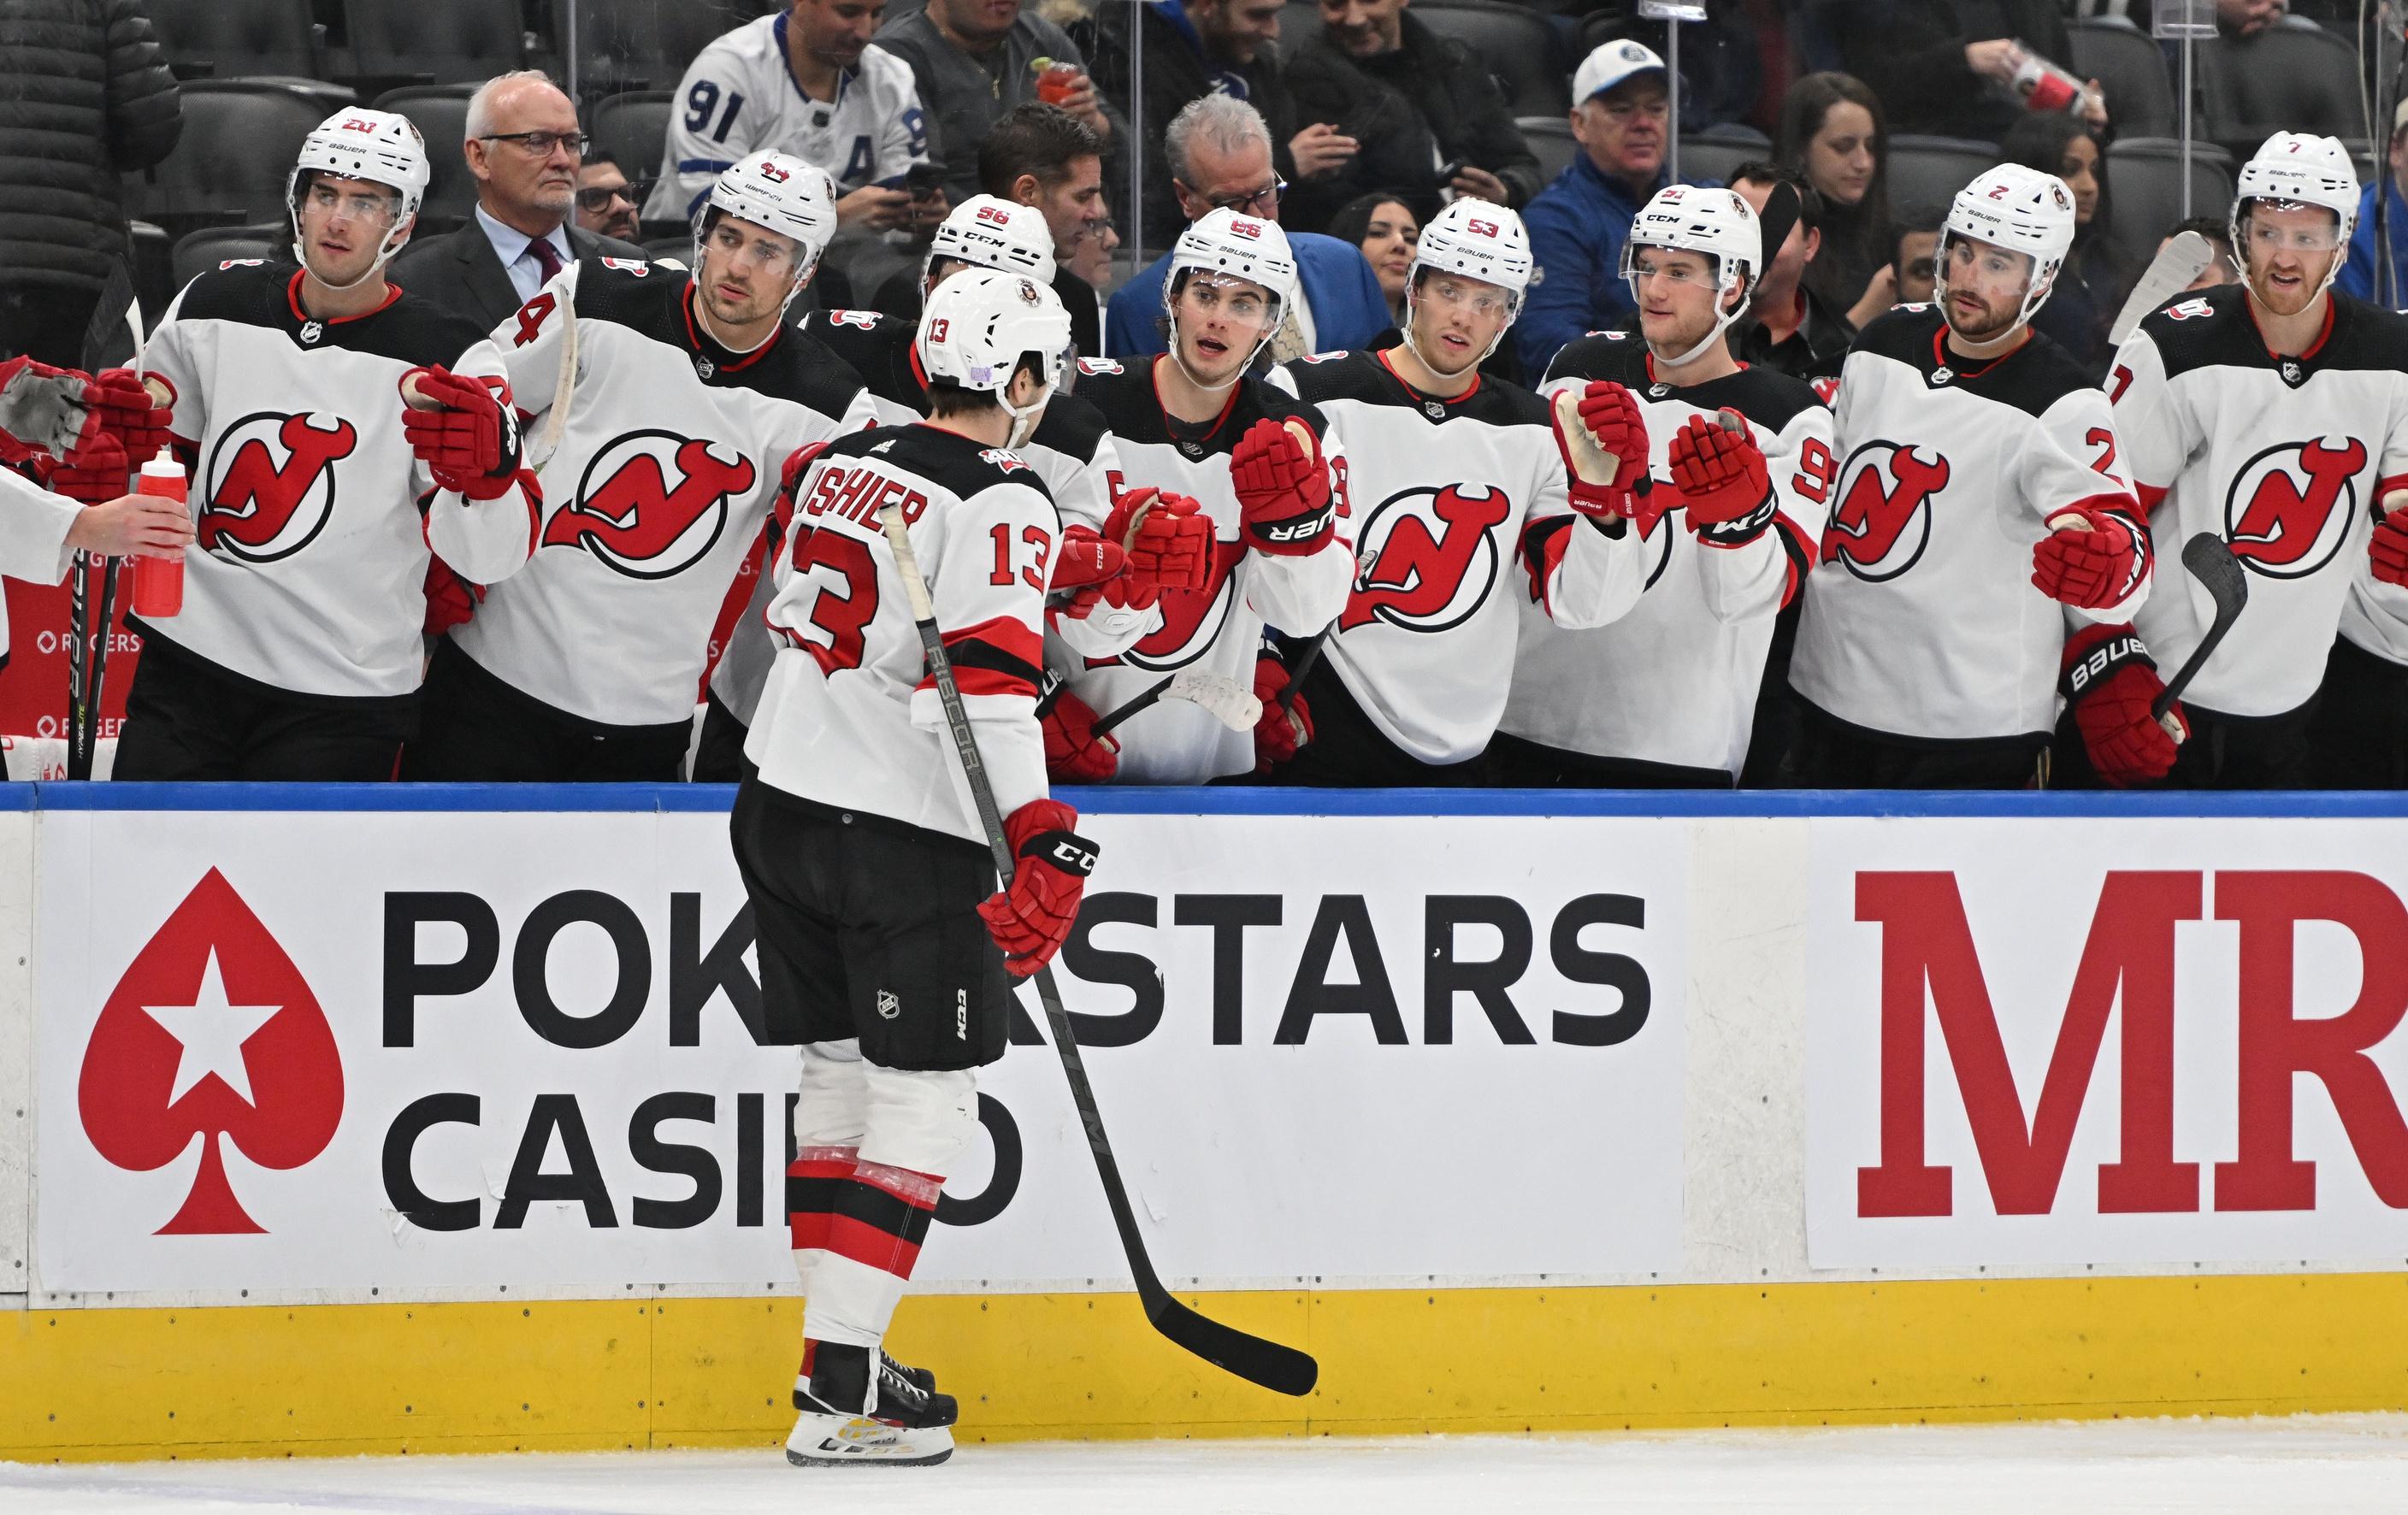 New Jersey Devils forward Nico Hischier (13) celebrates with teammates after scoring against the Toronto Maple Leafs in the second period at Scotiabank Arena. / Dan Hamilton-USA TODAY Sports